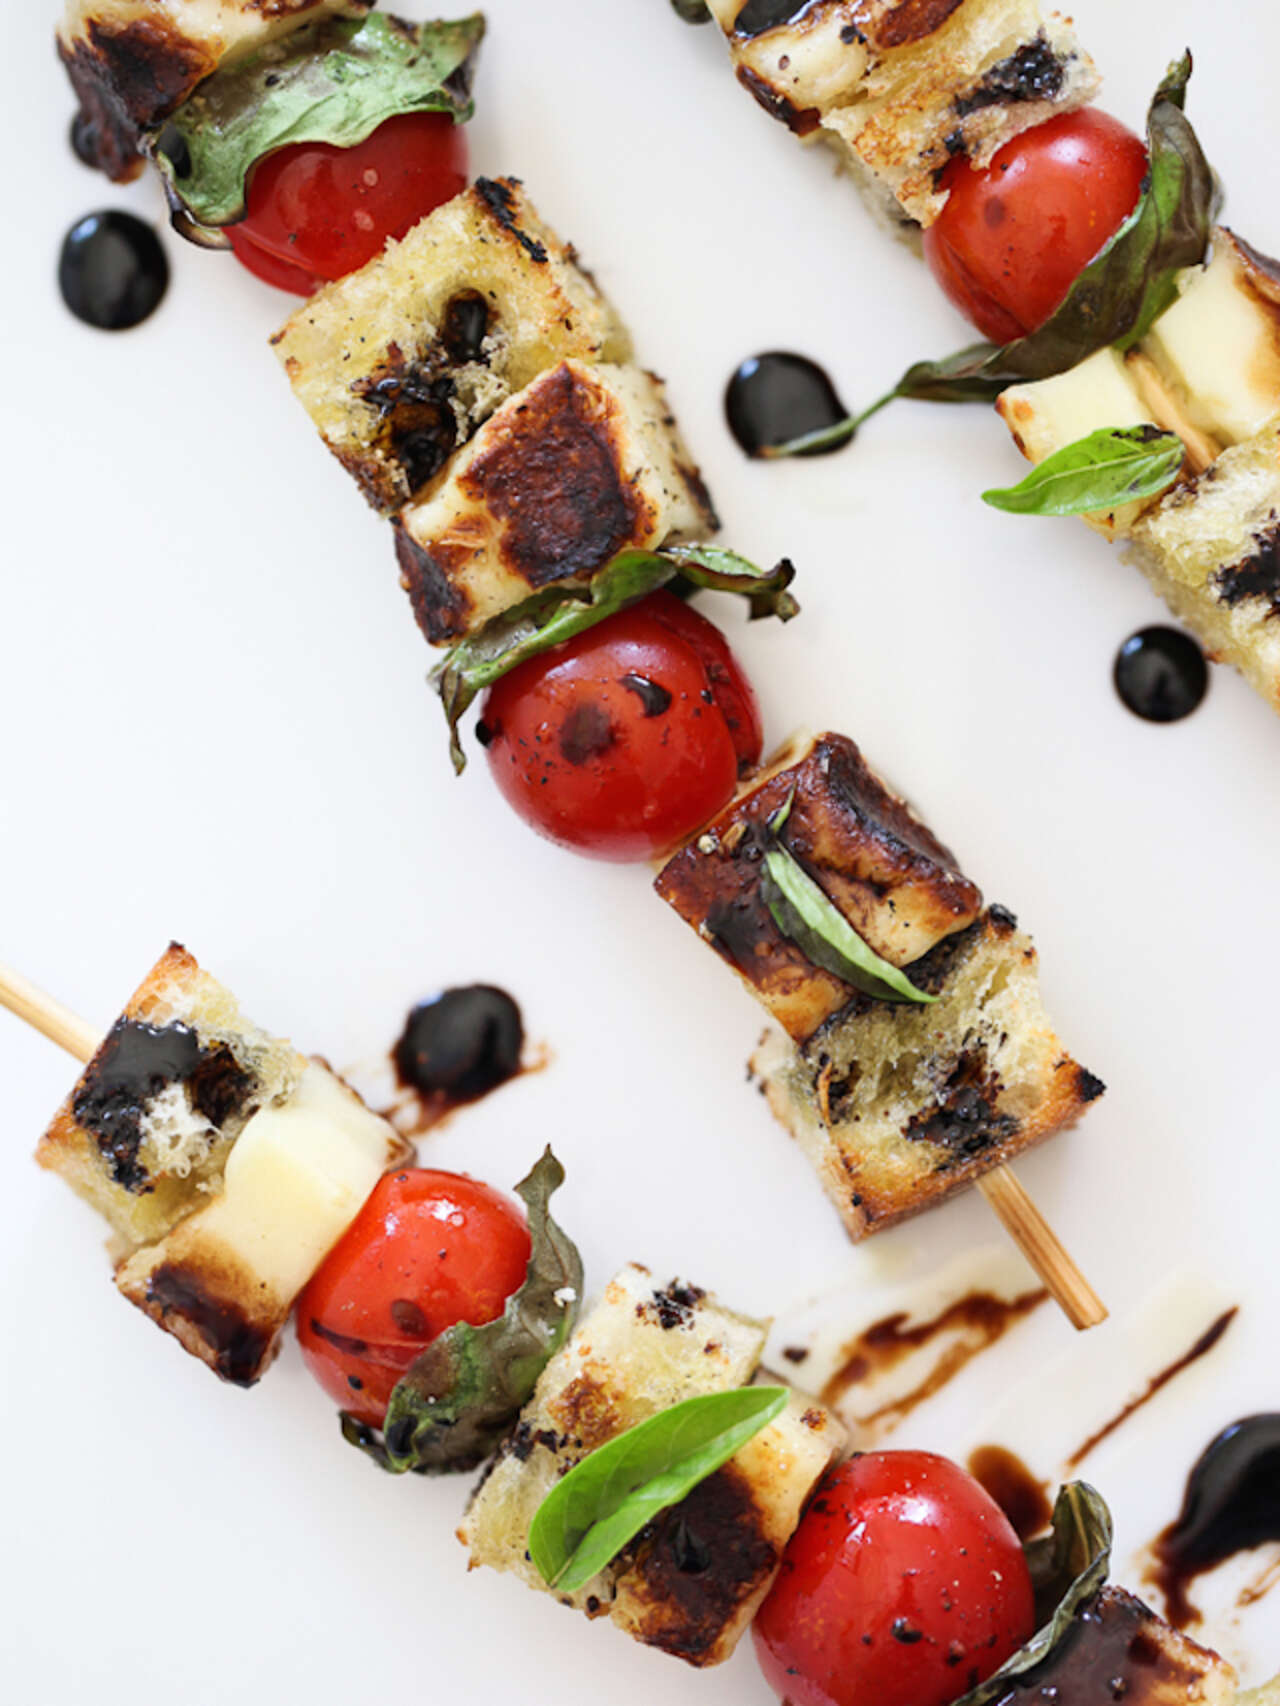 Vegetarian & Vegan Dishes for Your Next Cookout or Barbecue - Thrillist